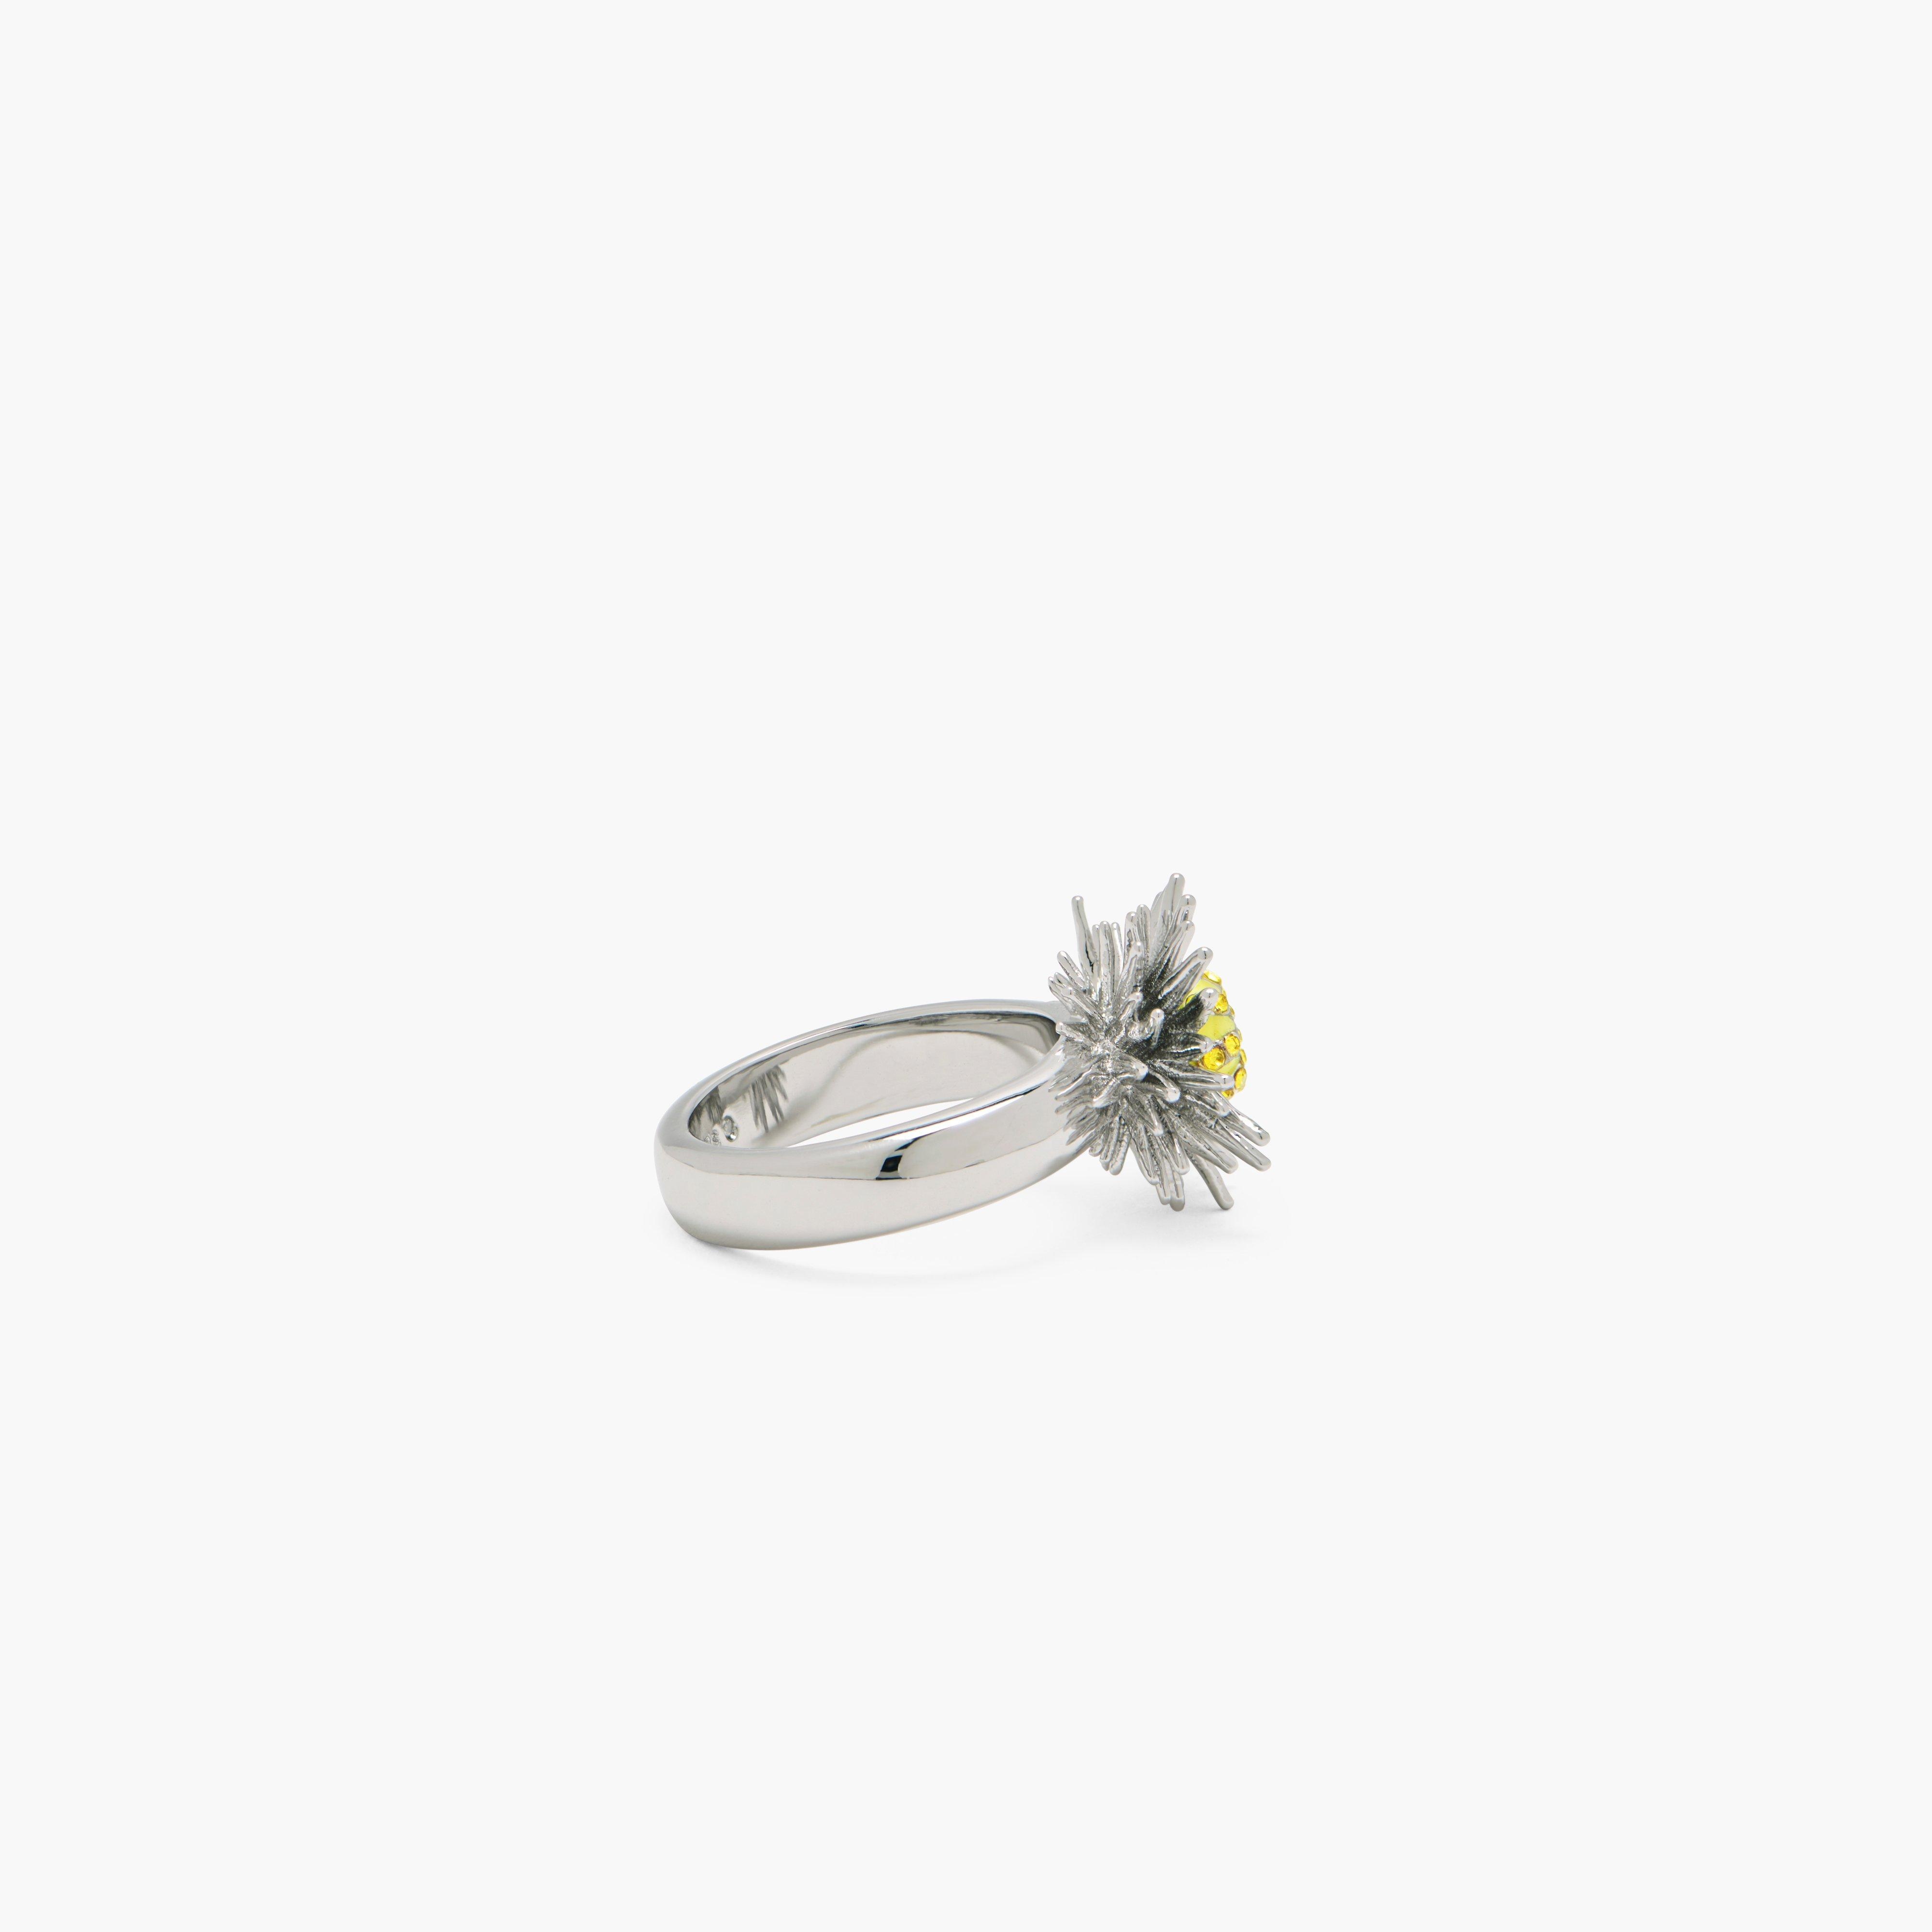 THE FUTURE FLORAL RING - 5